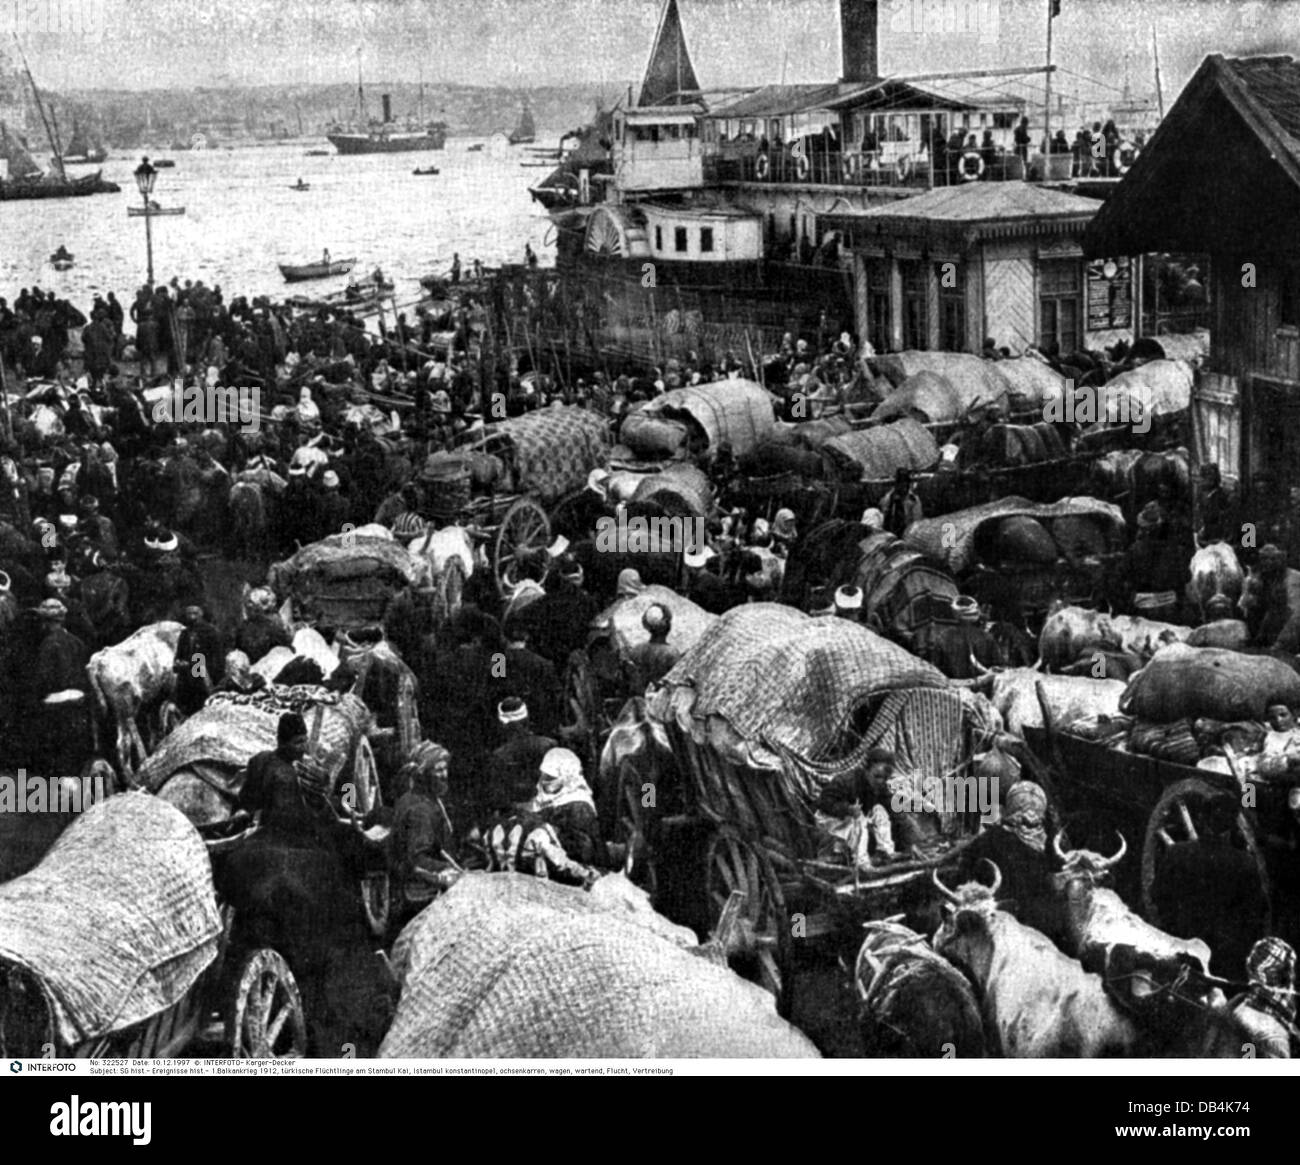 events, 1912/1913, First Balkan War 1912, Turkish refugees waiting at the quay of Istanbul, Constantinople, ox cart, wagon, waiting, expulsion, historic, historical, people, 1910s, 20th century, Additional-Rights-Clearences-Not Available Stock Photo